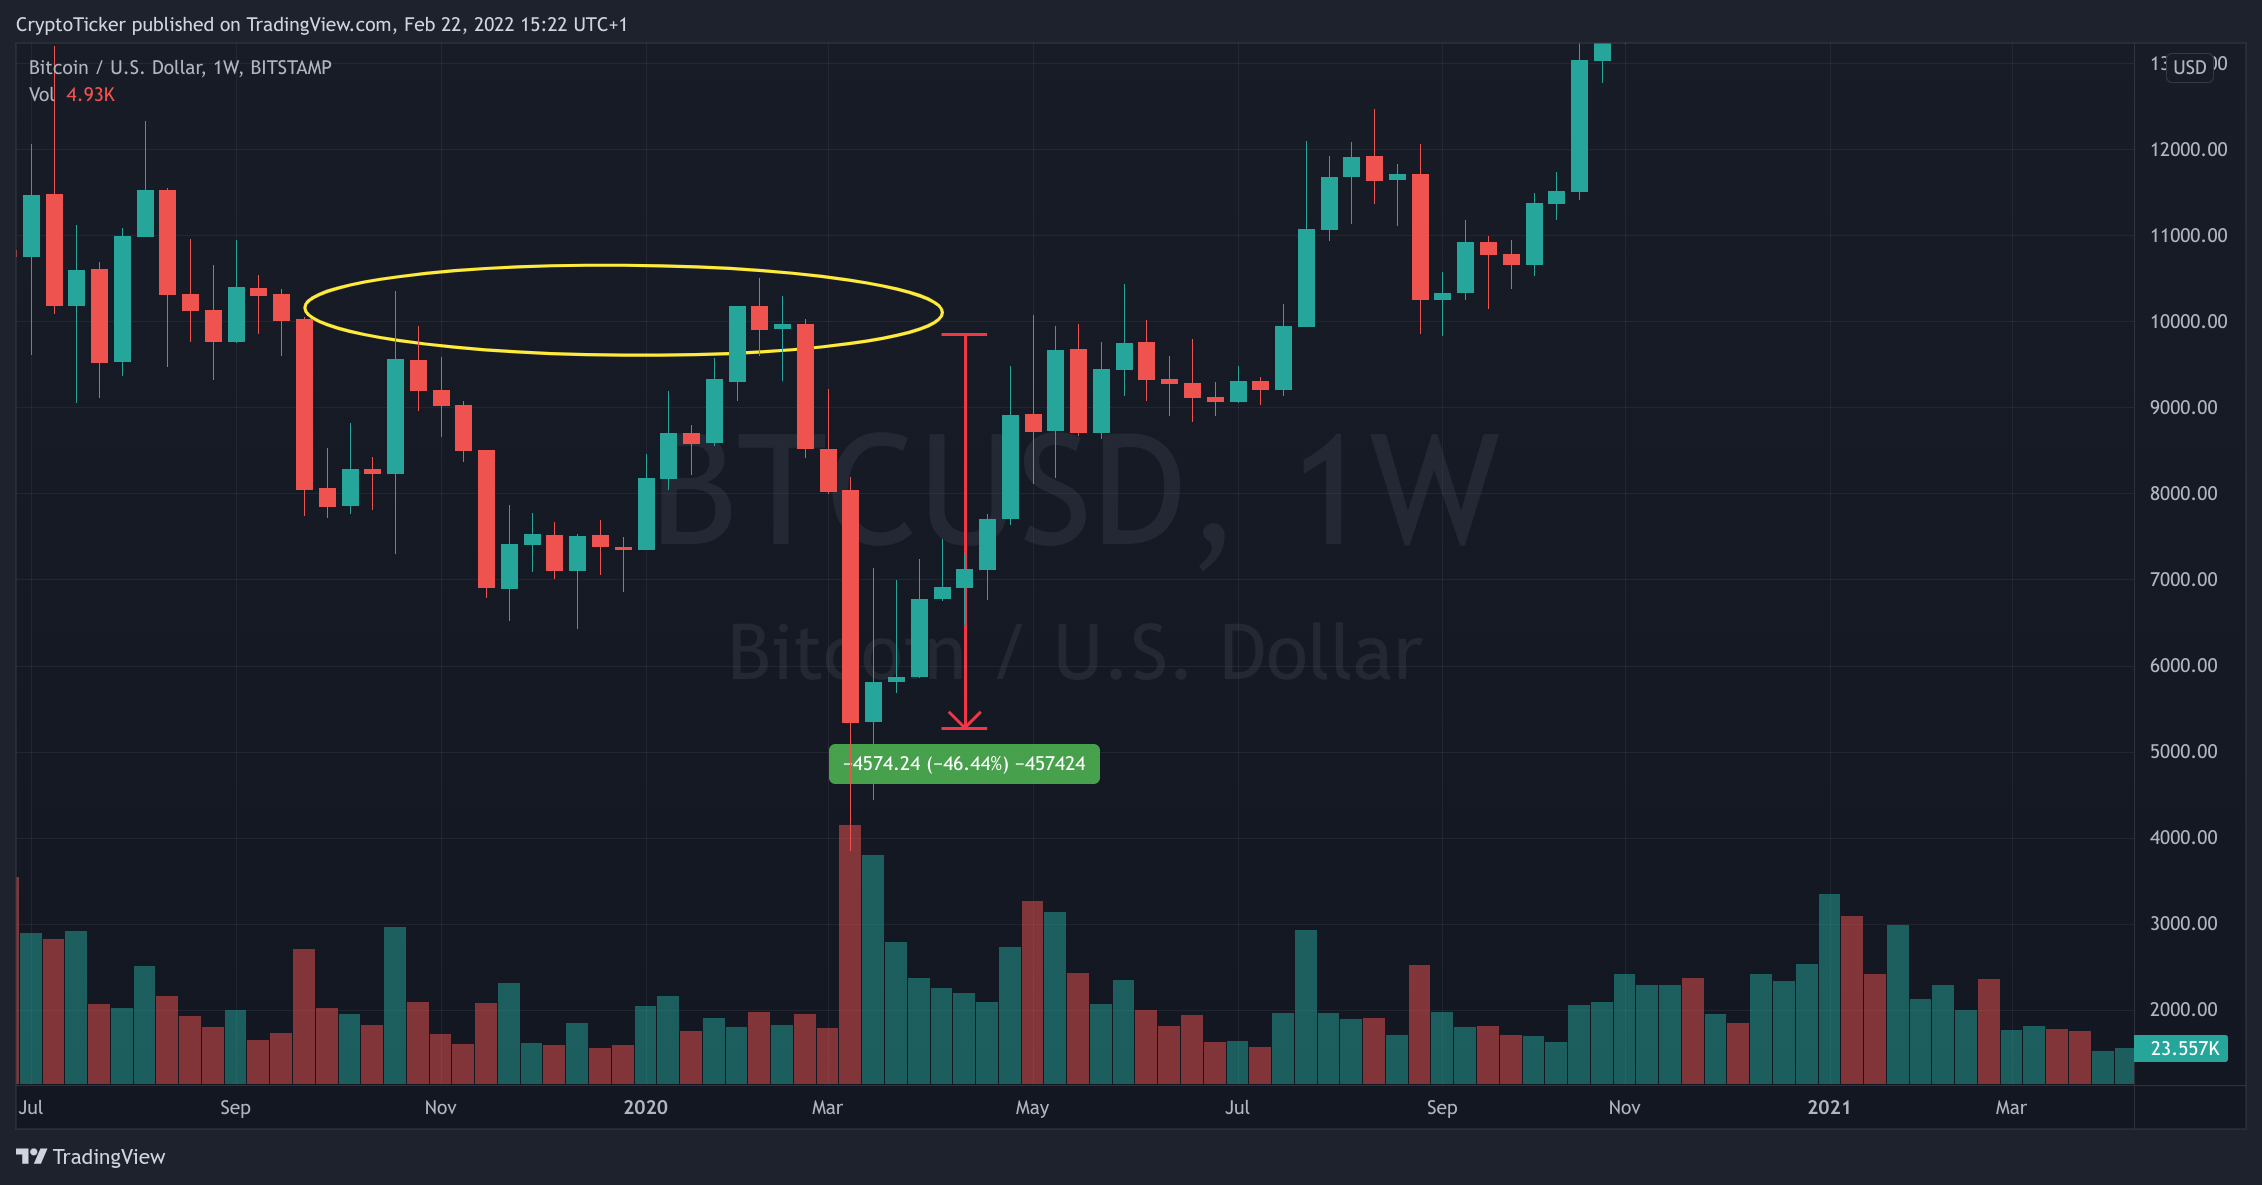 BTC/USD 1-week chart showing the COVID-19 effect on Bitcoin followed by a recovery